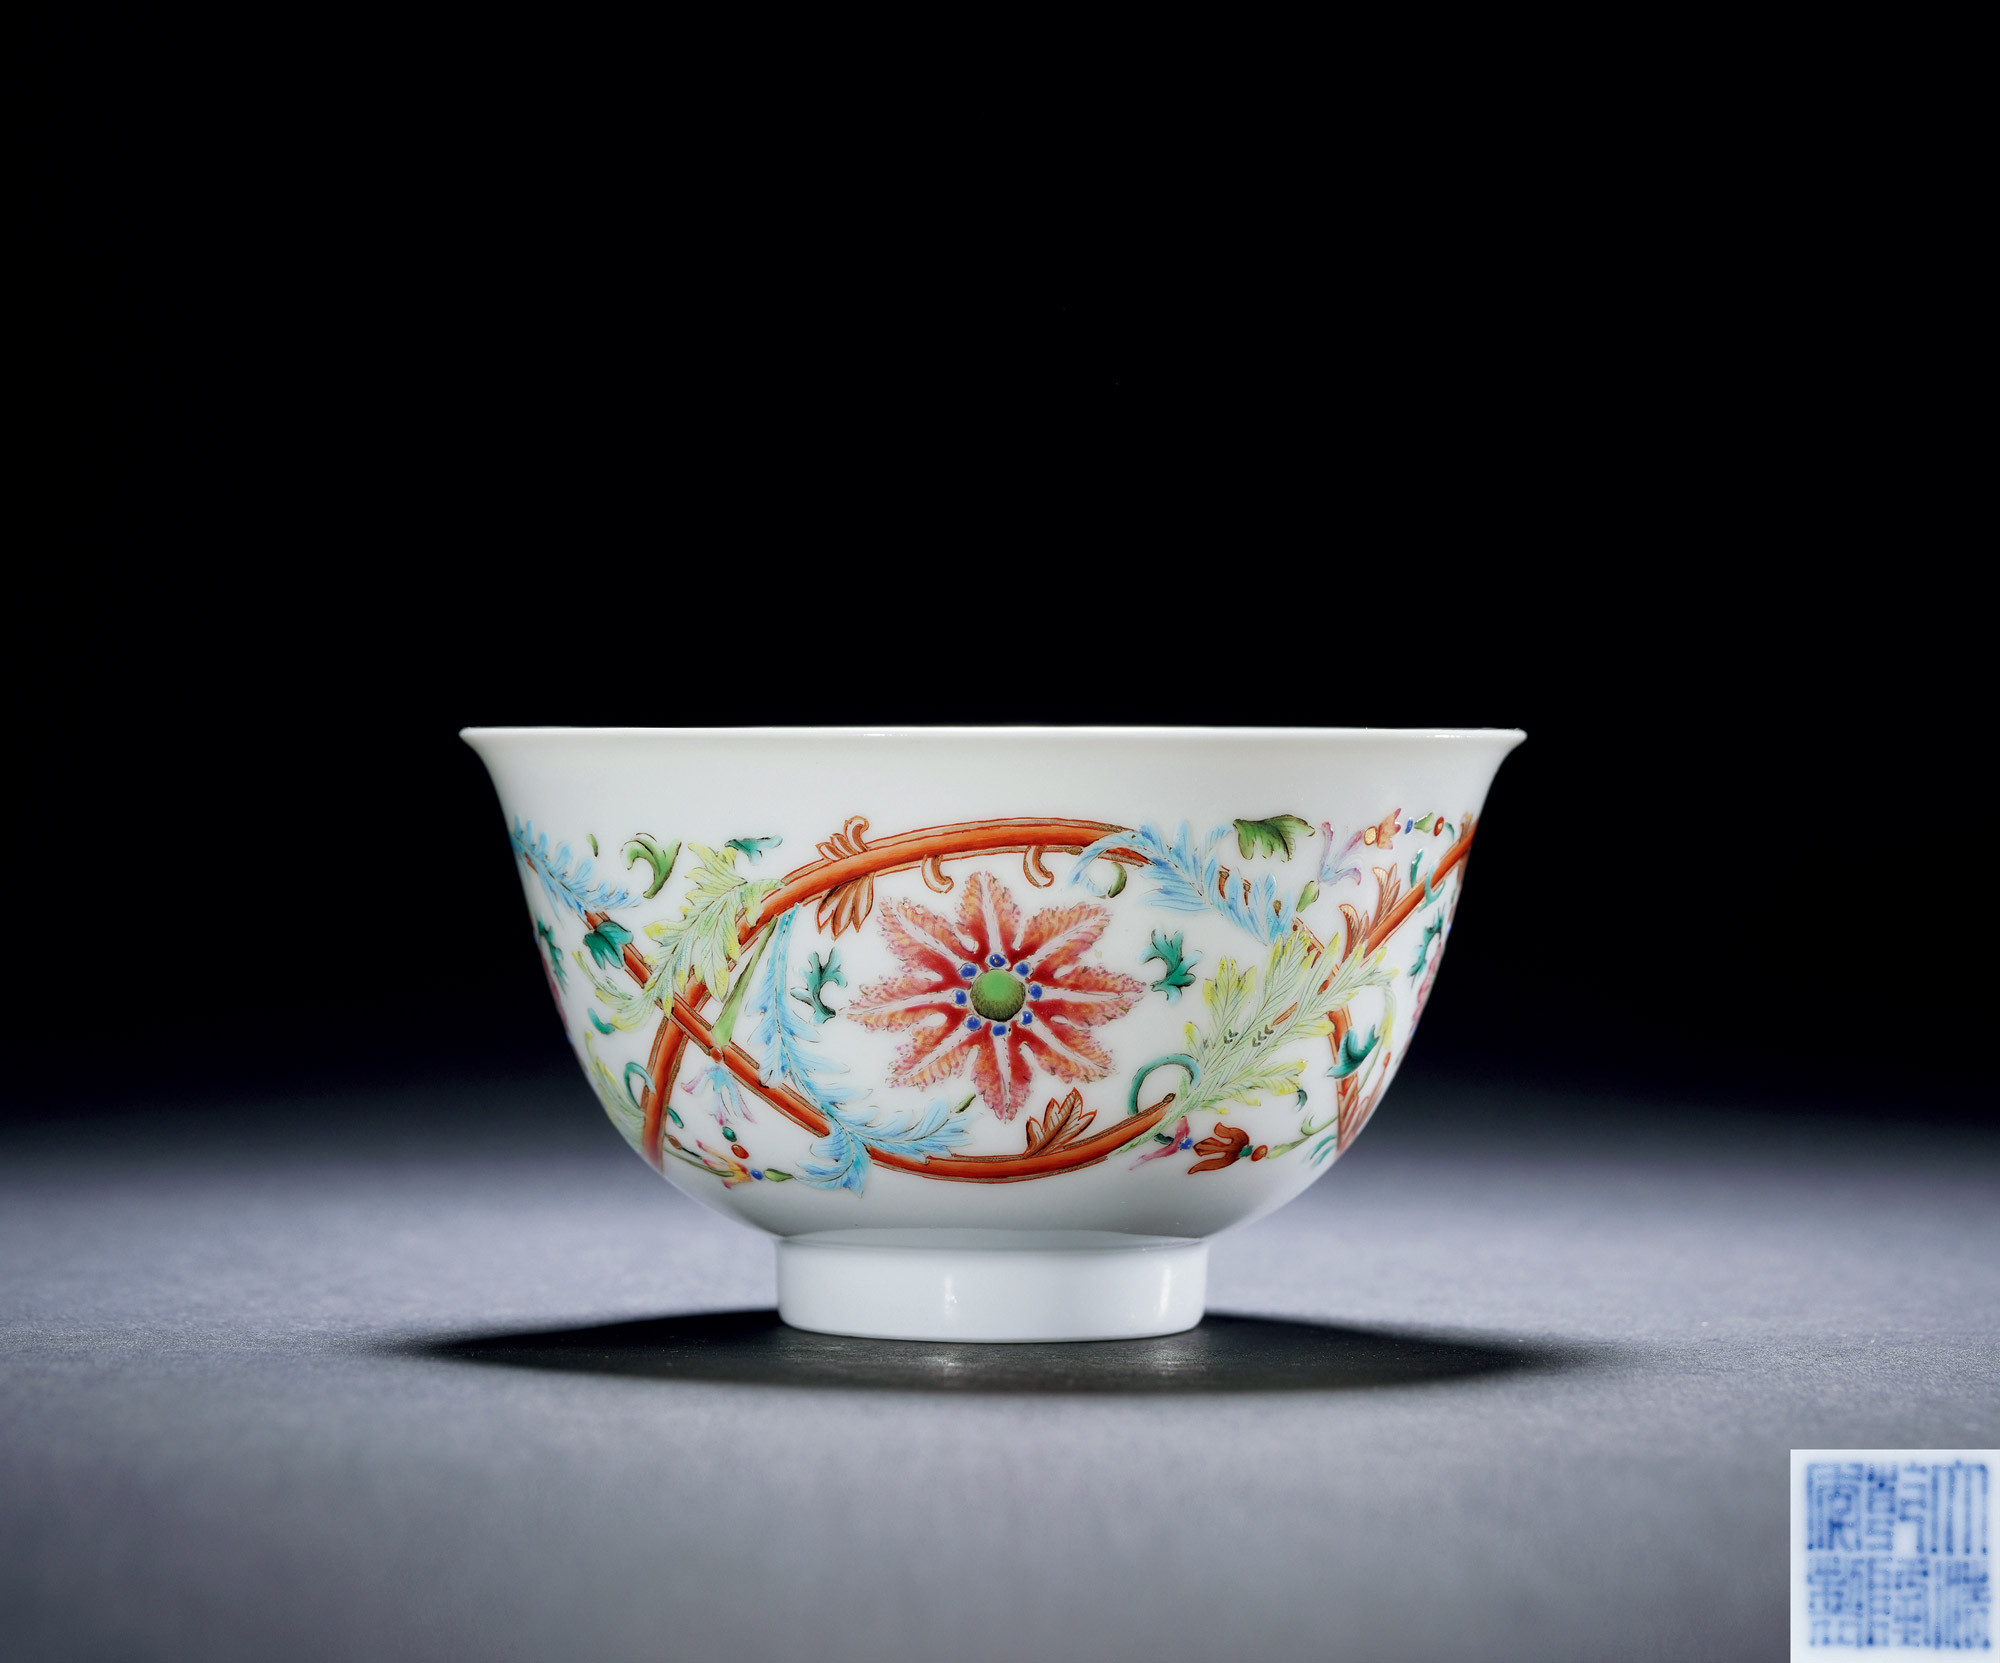 AN IMPORTANT AND IMPERIAL YANGCAI BAROQUE PATTERN‘VINE AND FLORAL’BOWL